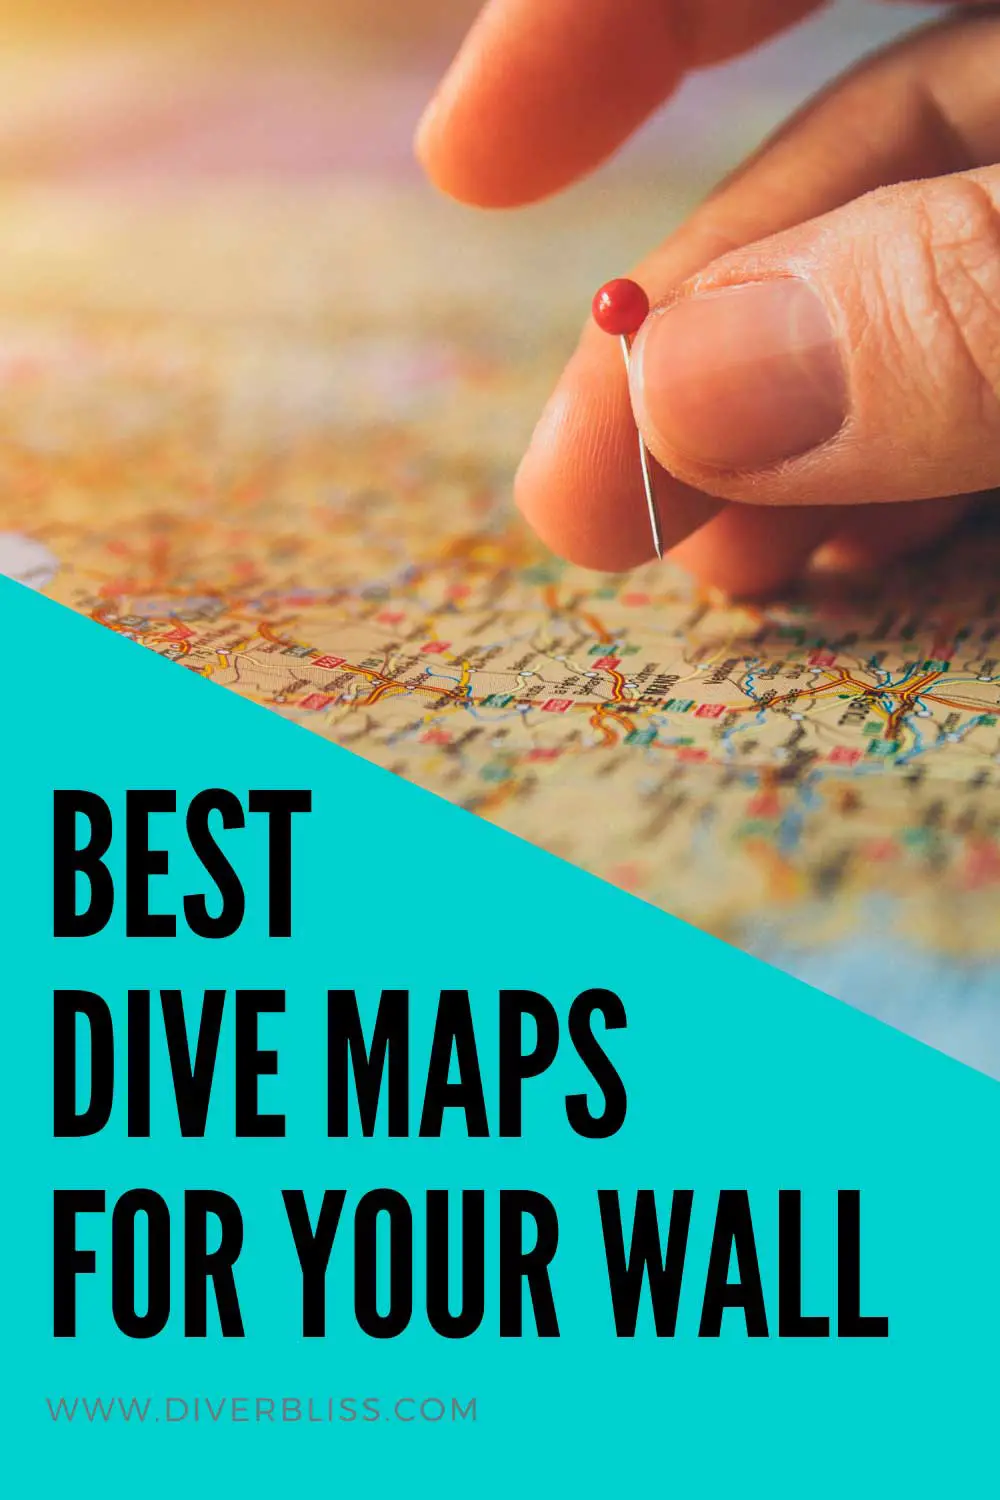 Best Dive Maps for your Walls